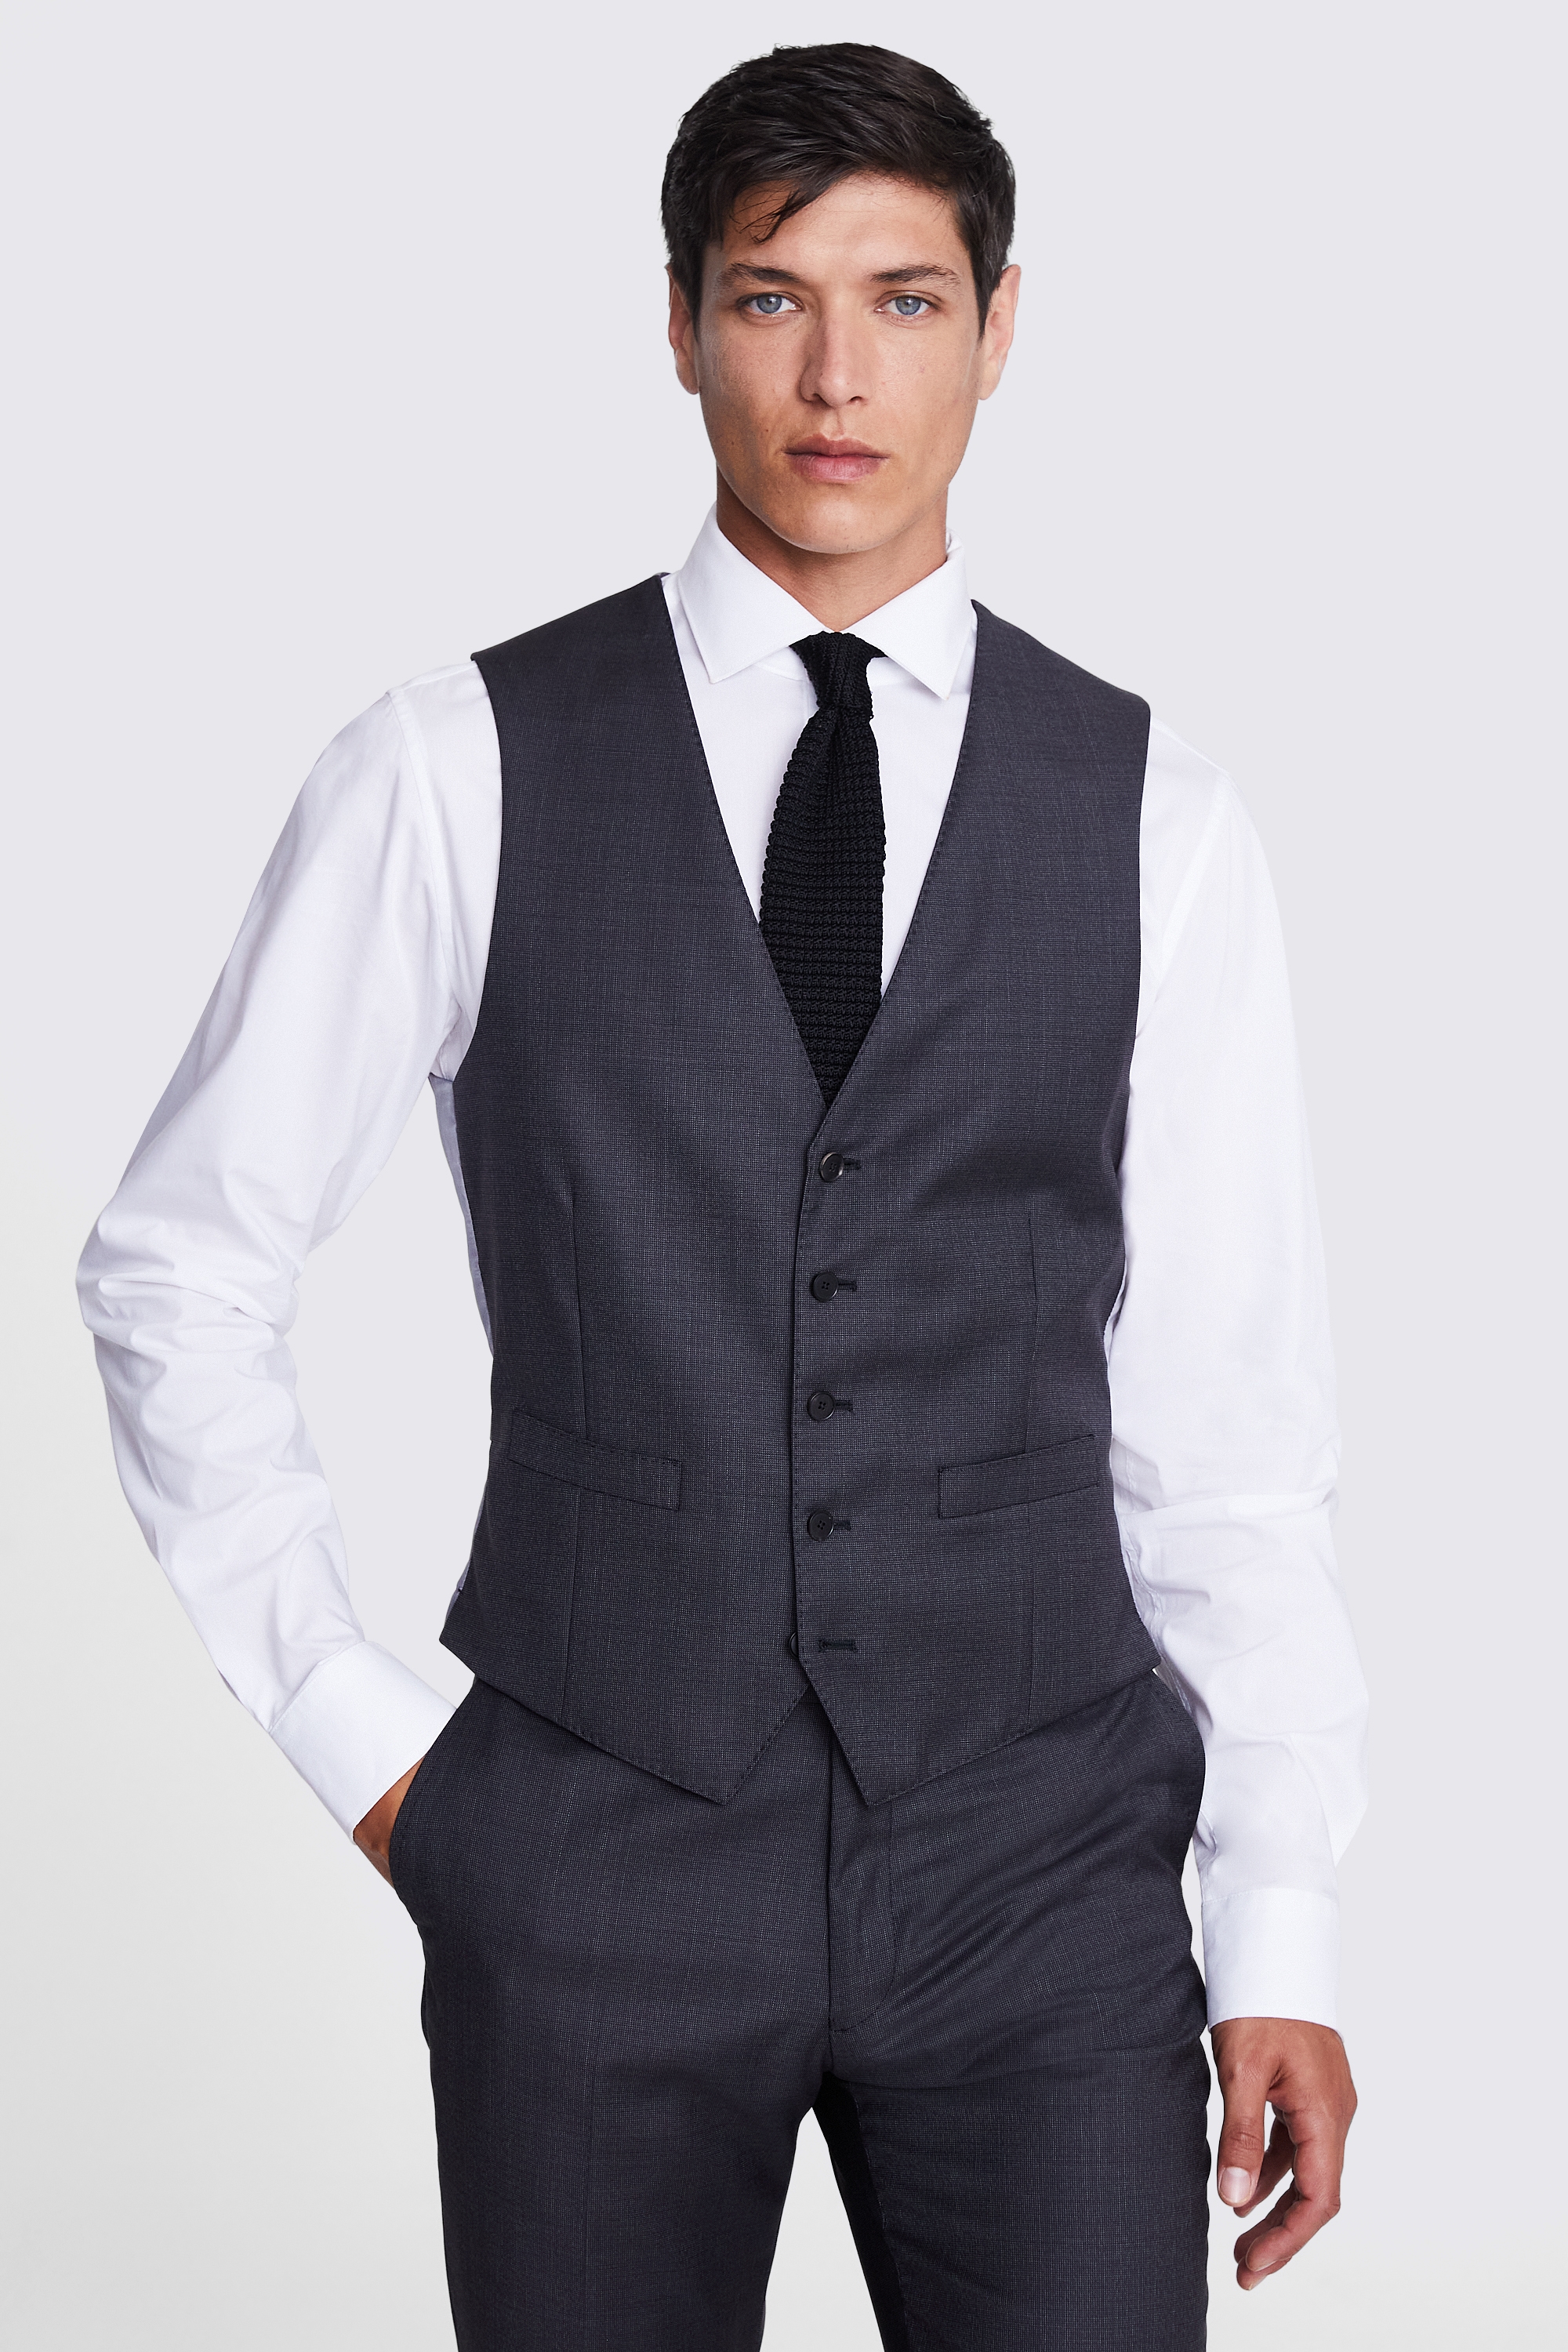 Tailored Fit Charcoal Waistcoat | Buy Online at Moss